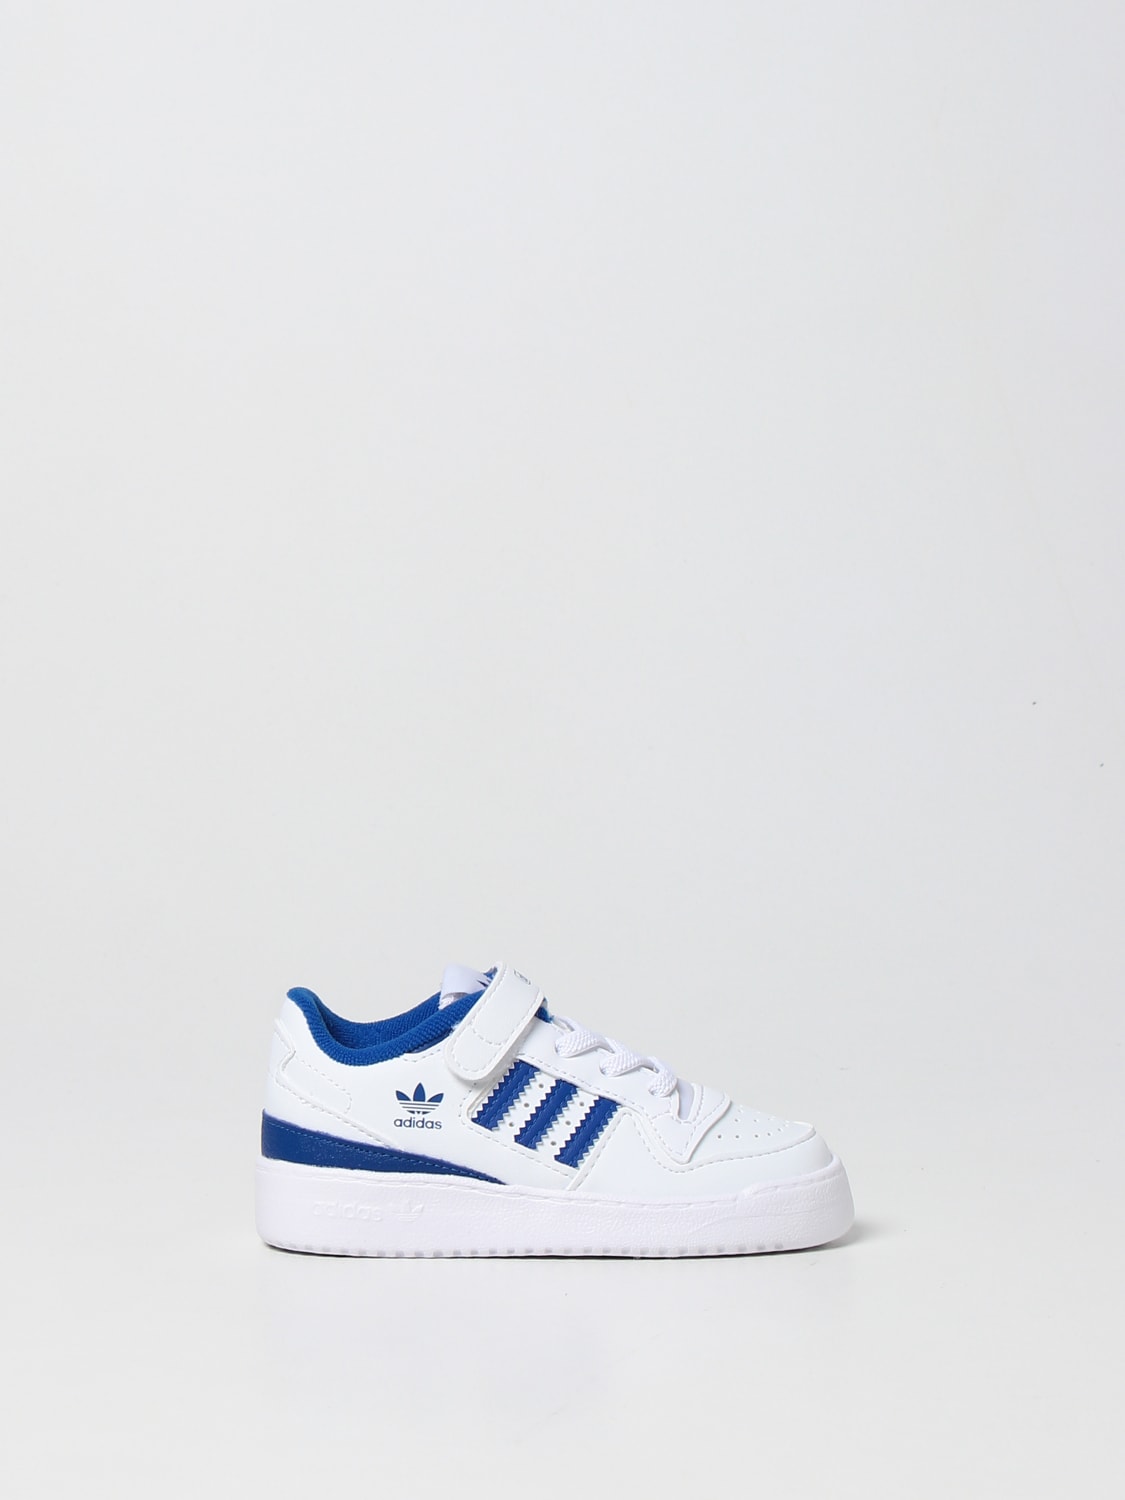 støn Daggry skive Adidas Originals Outlet: Forum sneakers in synthetic leather - White |  Adidas Originals shoes FY7986 online on GIGLIO.COM